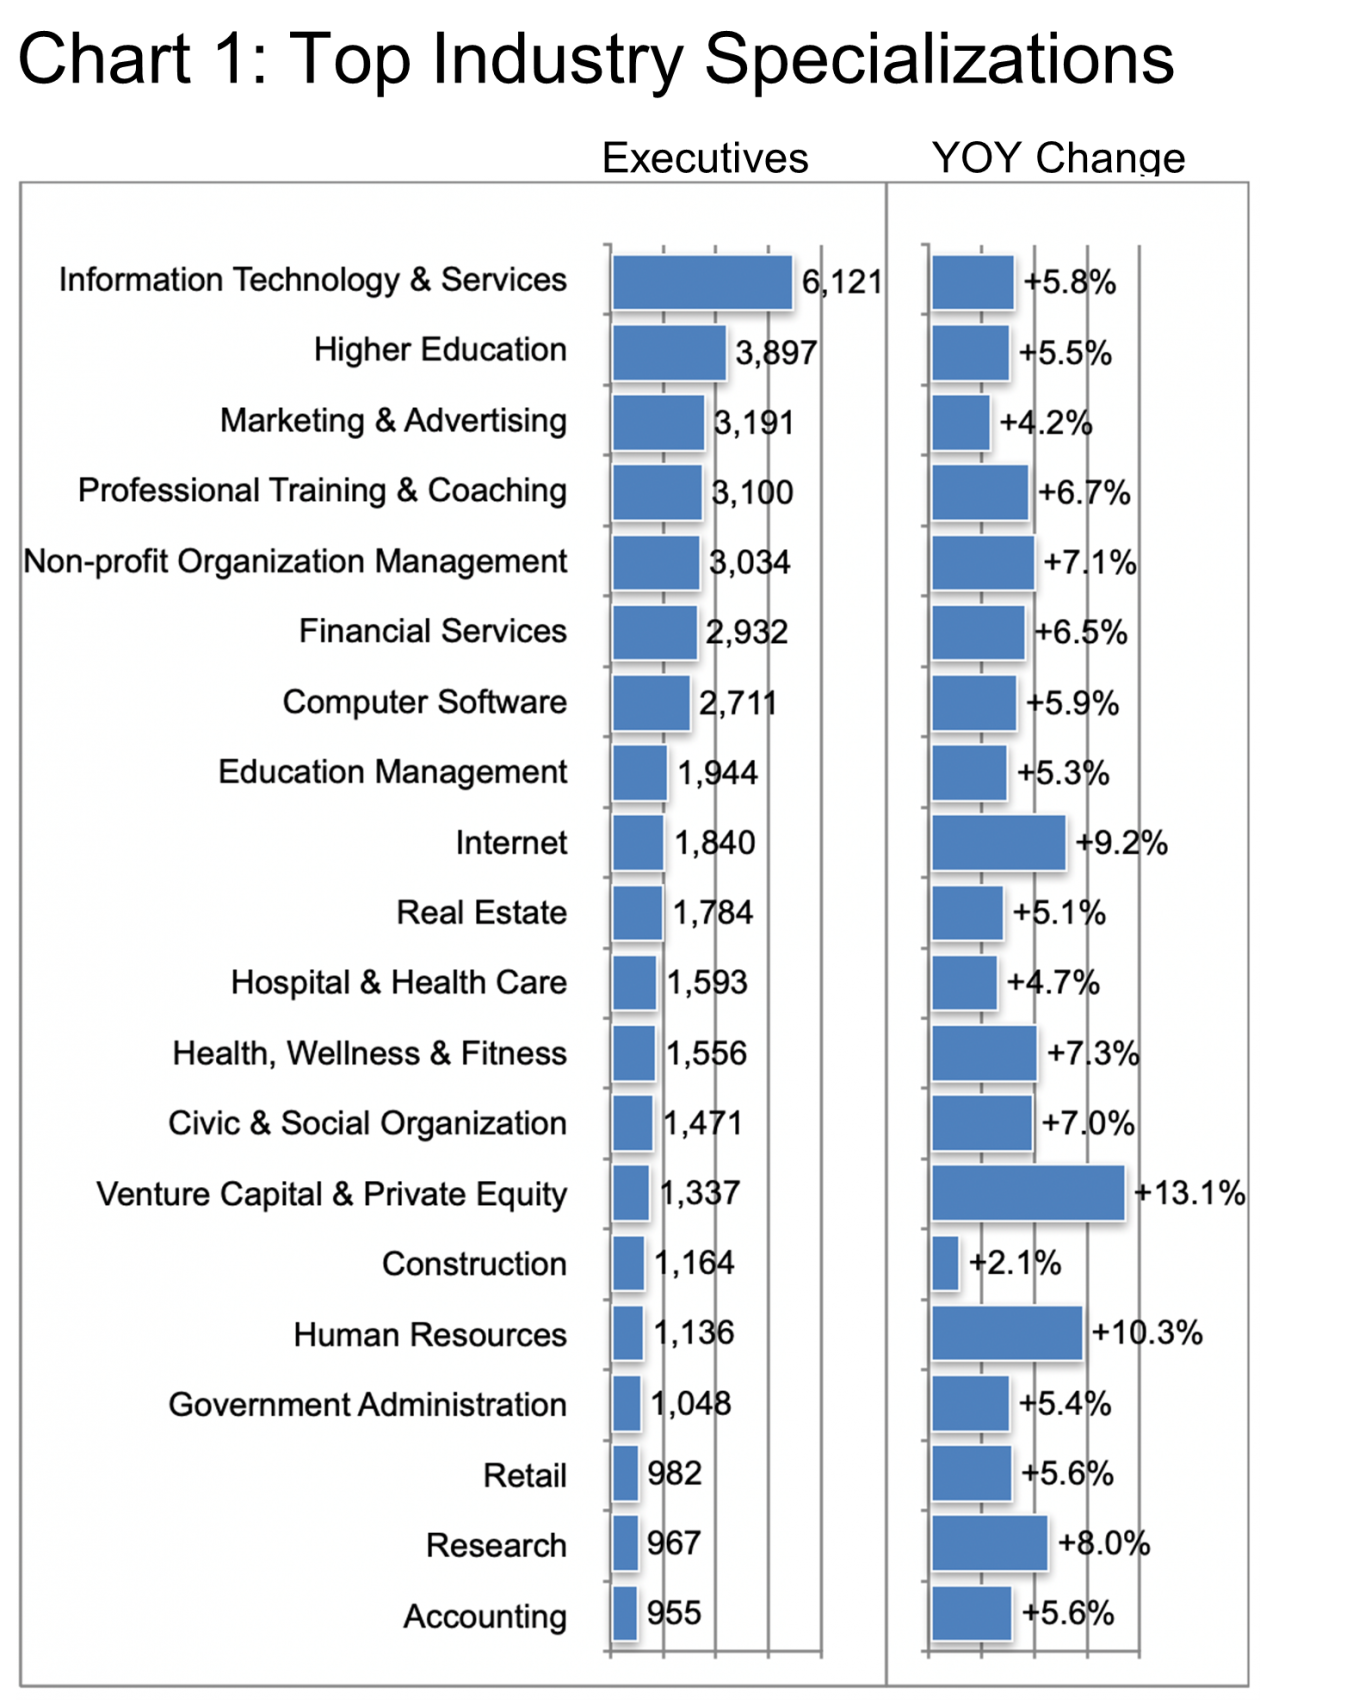 Chart 1-Top Industry Specializations-Management Consulting